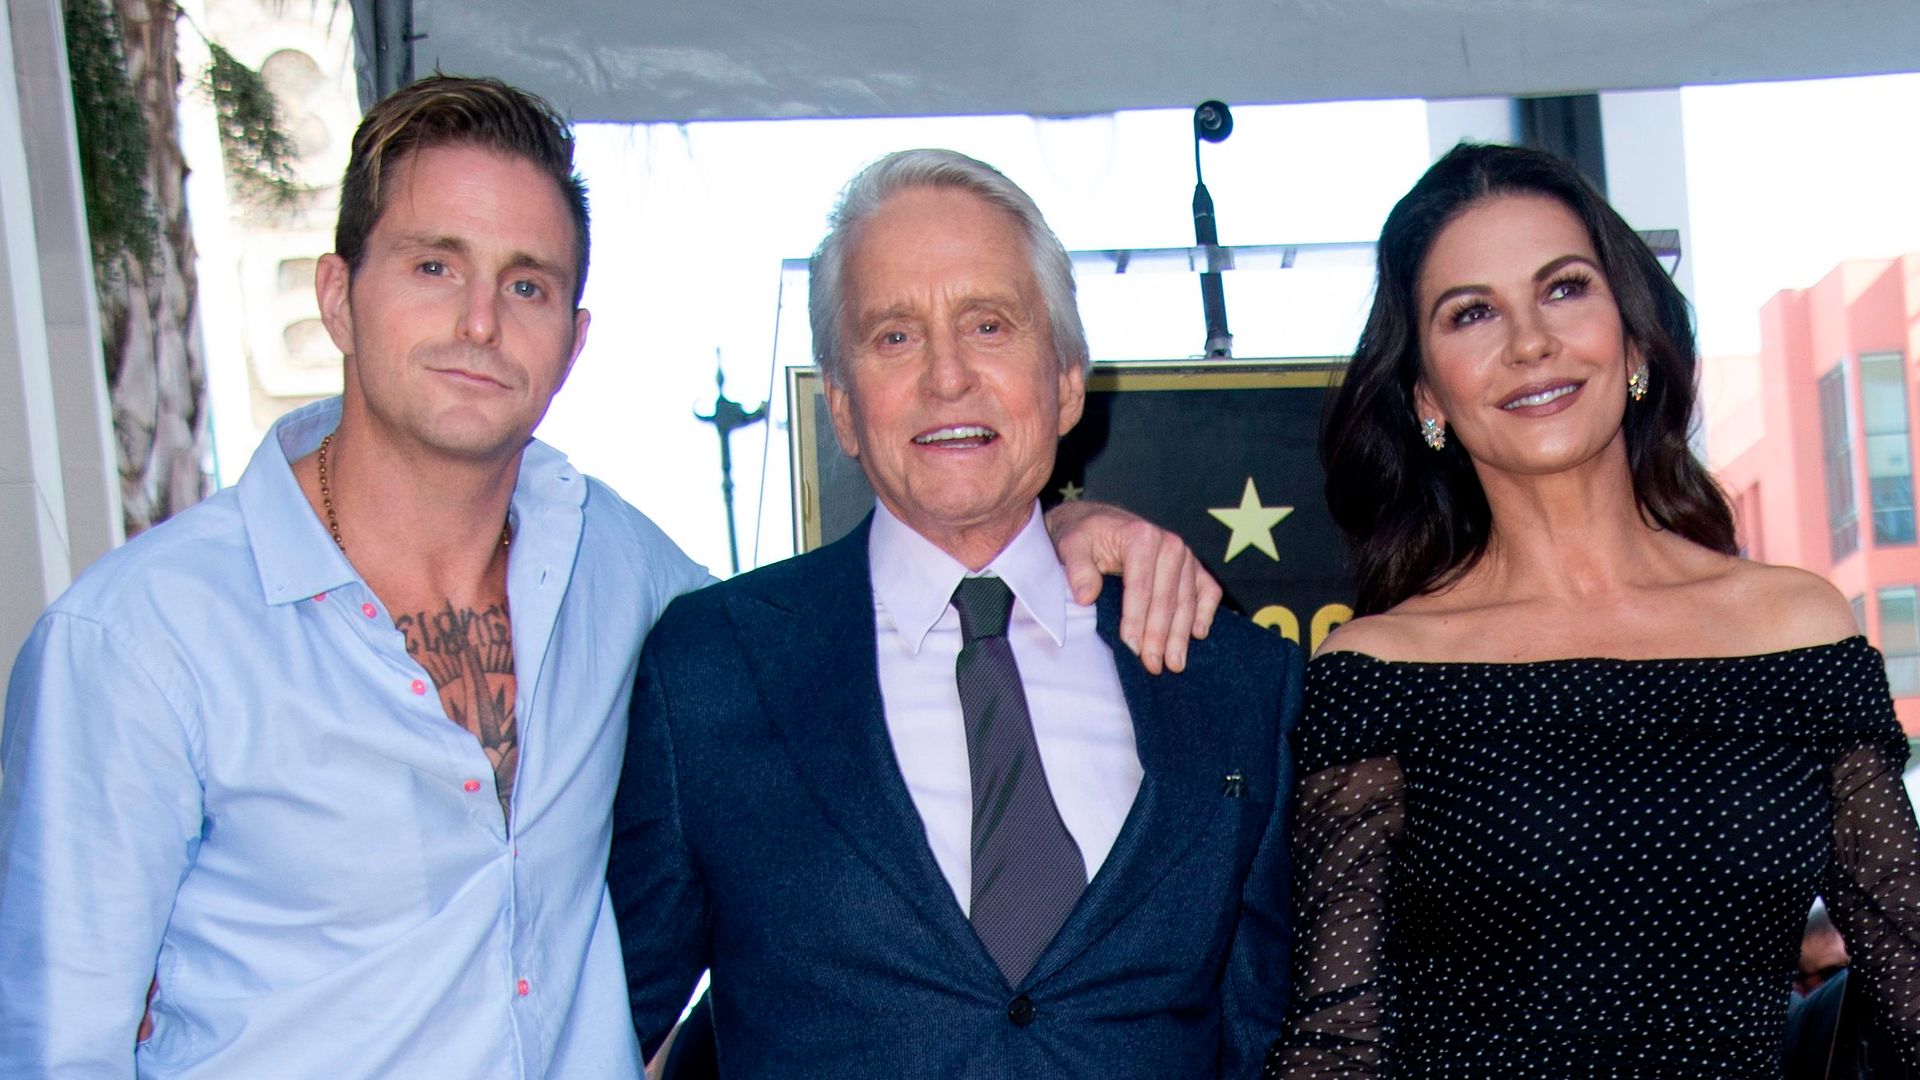 Cameron Douglas, Michael Douglas, Catherine Zeta-Jones attend the ceremony honoring actor Michael Douglas with a Star on Hollywood Walk of Fame, in Hollywood, California on November 6, 2018